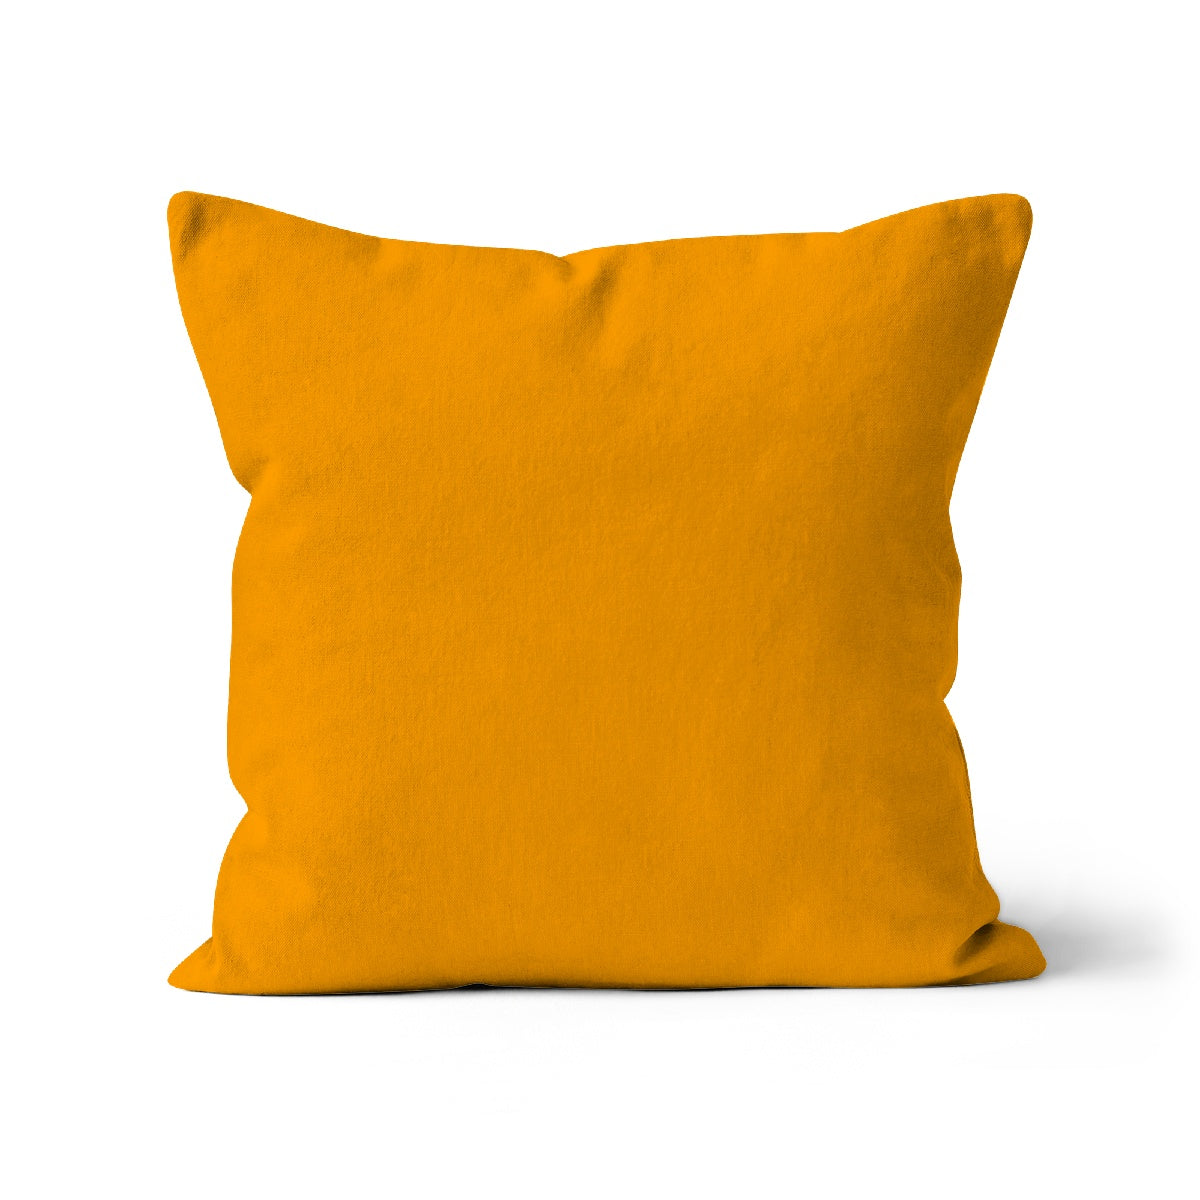 Orange cushion cover, organic cotton fabric, washable, made in the UK, free shipping Designer Cushion Cover with Vibrant Patterns, Organic Cotton Orange Pillowcase, Bright Orange Cushion Cover for Sale, Soft Furnishings in Vivid Orange Organic Cotton, Playful Scatter Pillow Protector in Bright Orange, Home Accessories in Energetic Orange, Bright Orange Interior Design, Bright Orange Organic Cotton Cushion Cover Shop, Couch Pillow Protector in Vibrant Tangerine.